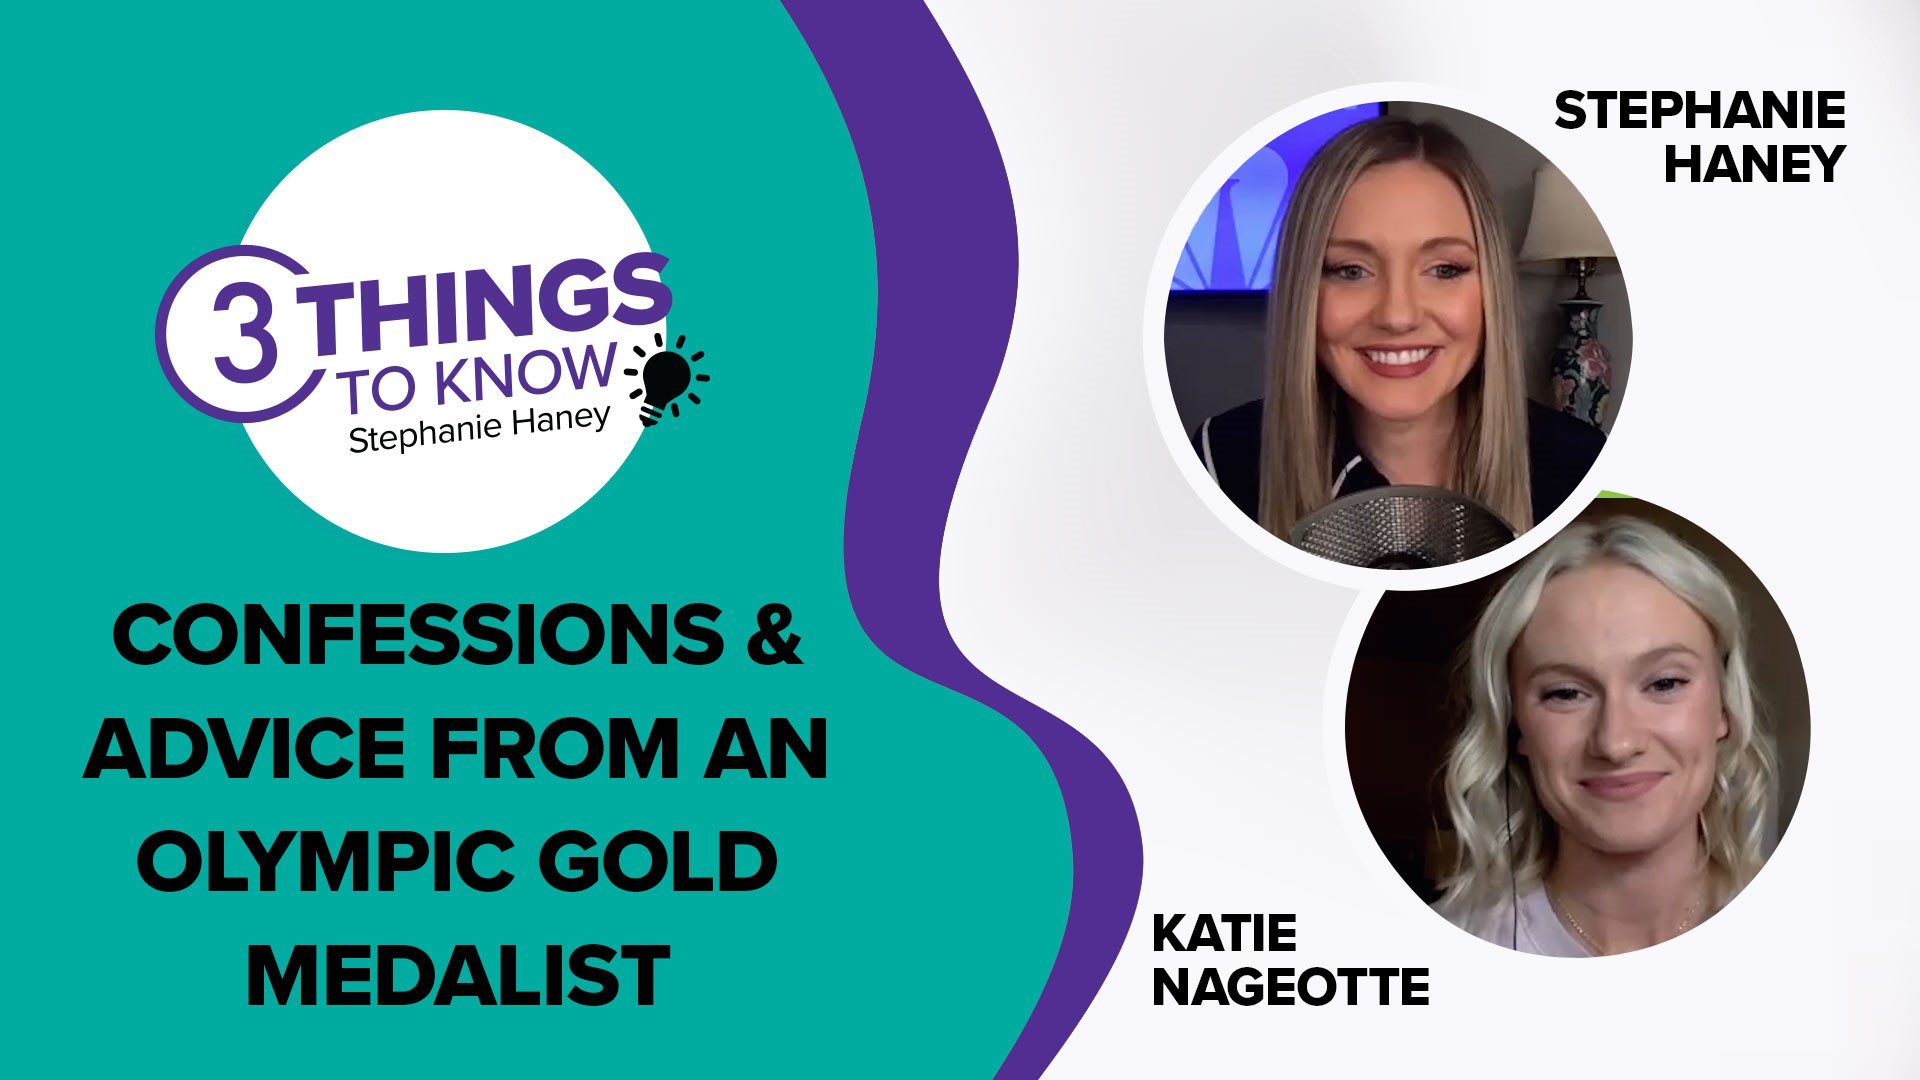 Nageotte reveals her mental struggle with motivation following winning the biggest sports competition in the world, and why she's changing her approach to pole vault